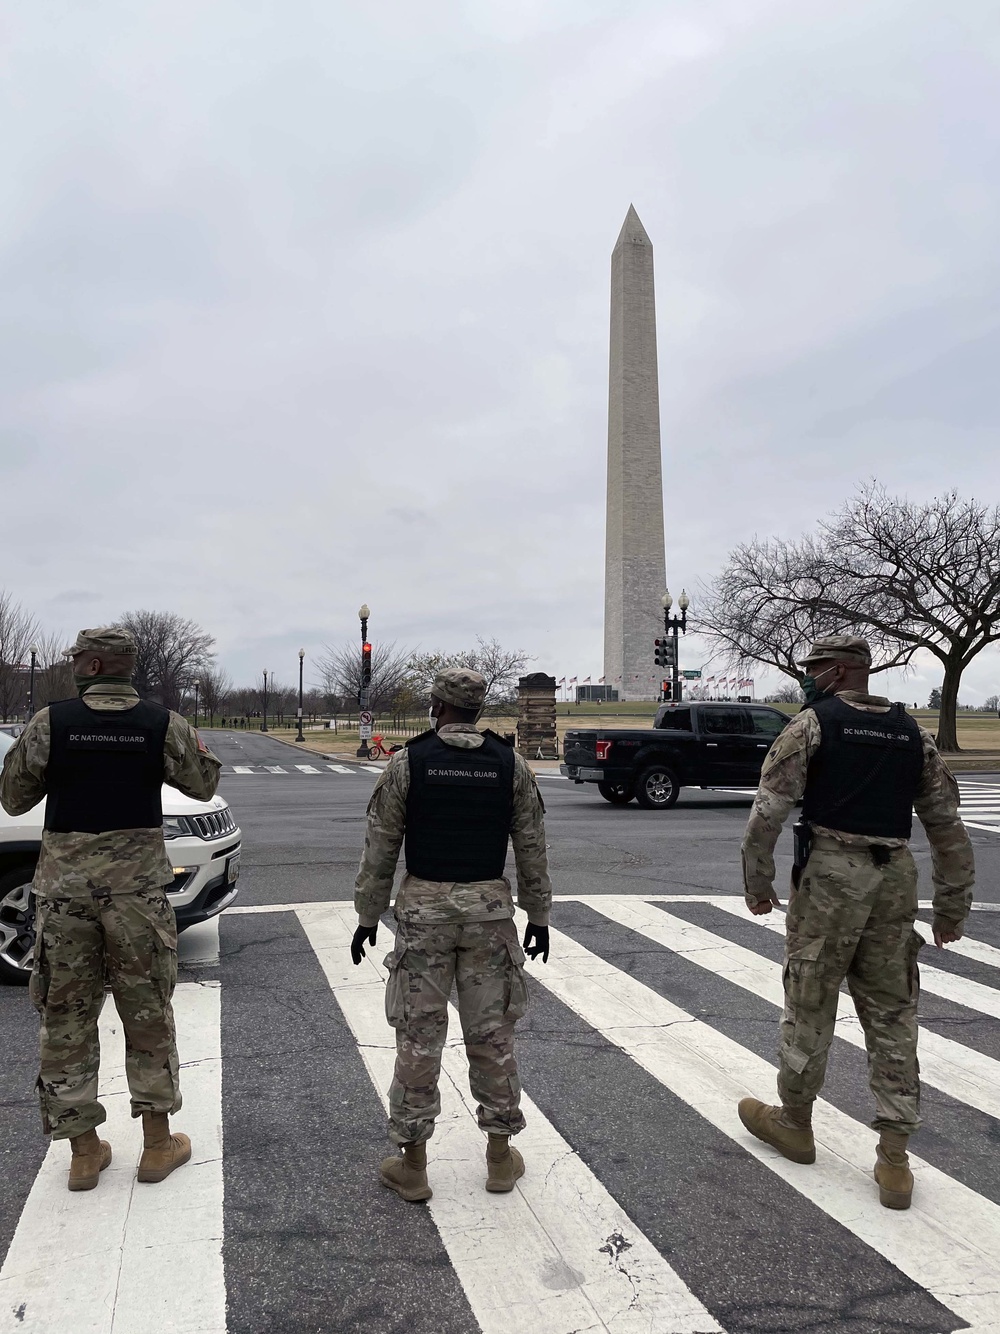 DC National Guard members, stand in front of monument in Washington, D.C on January 5 2021. The District of Columbia National Guard   activated several hundred personnel to support the city government during expected demonstrations.